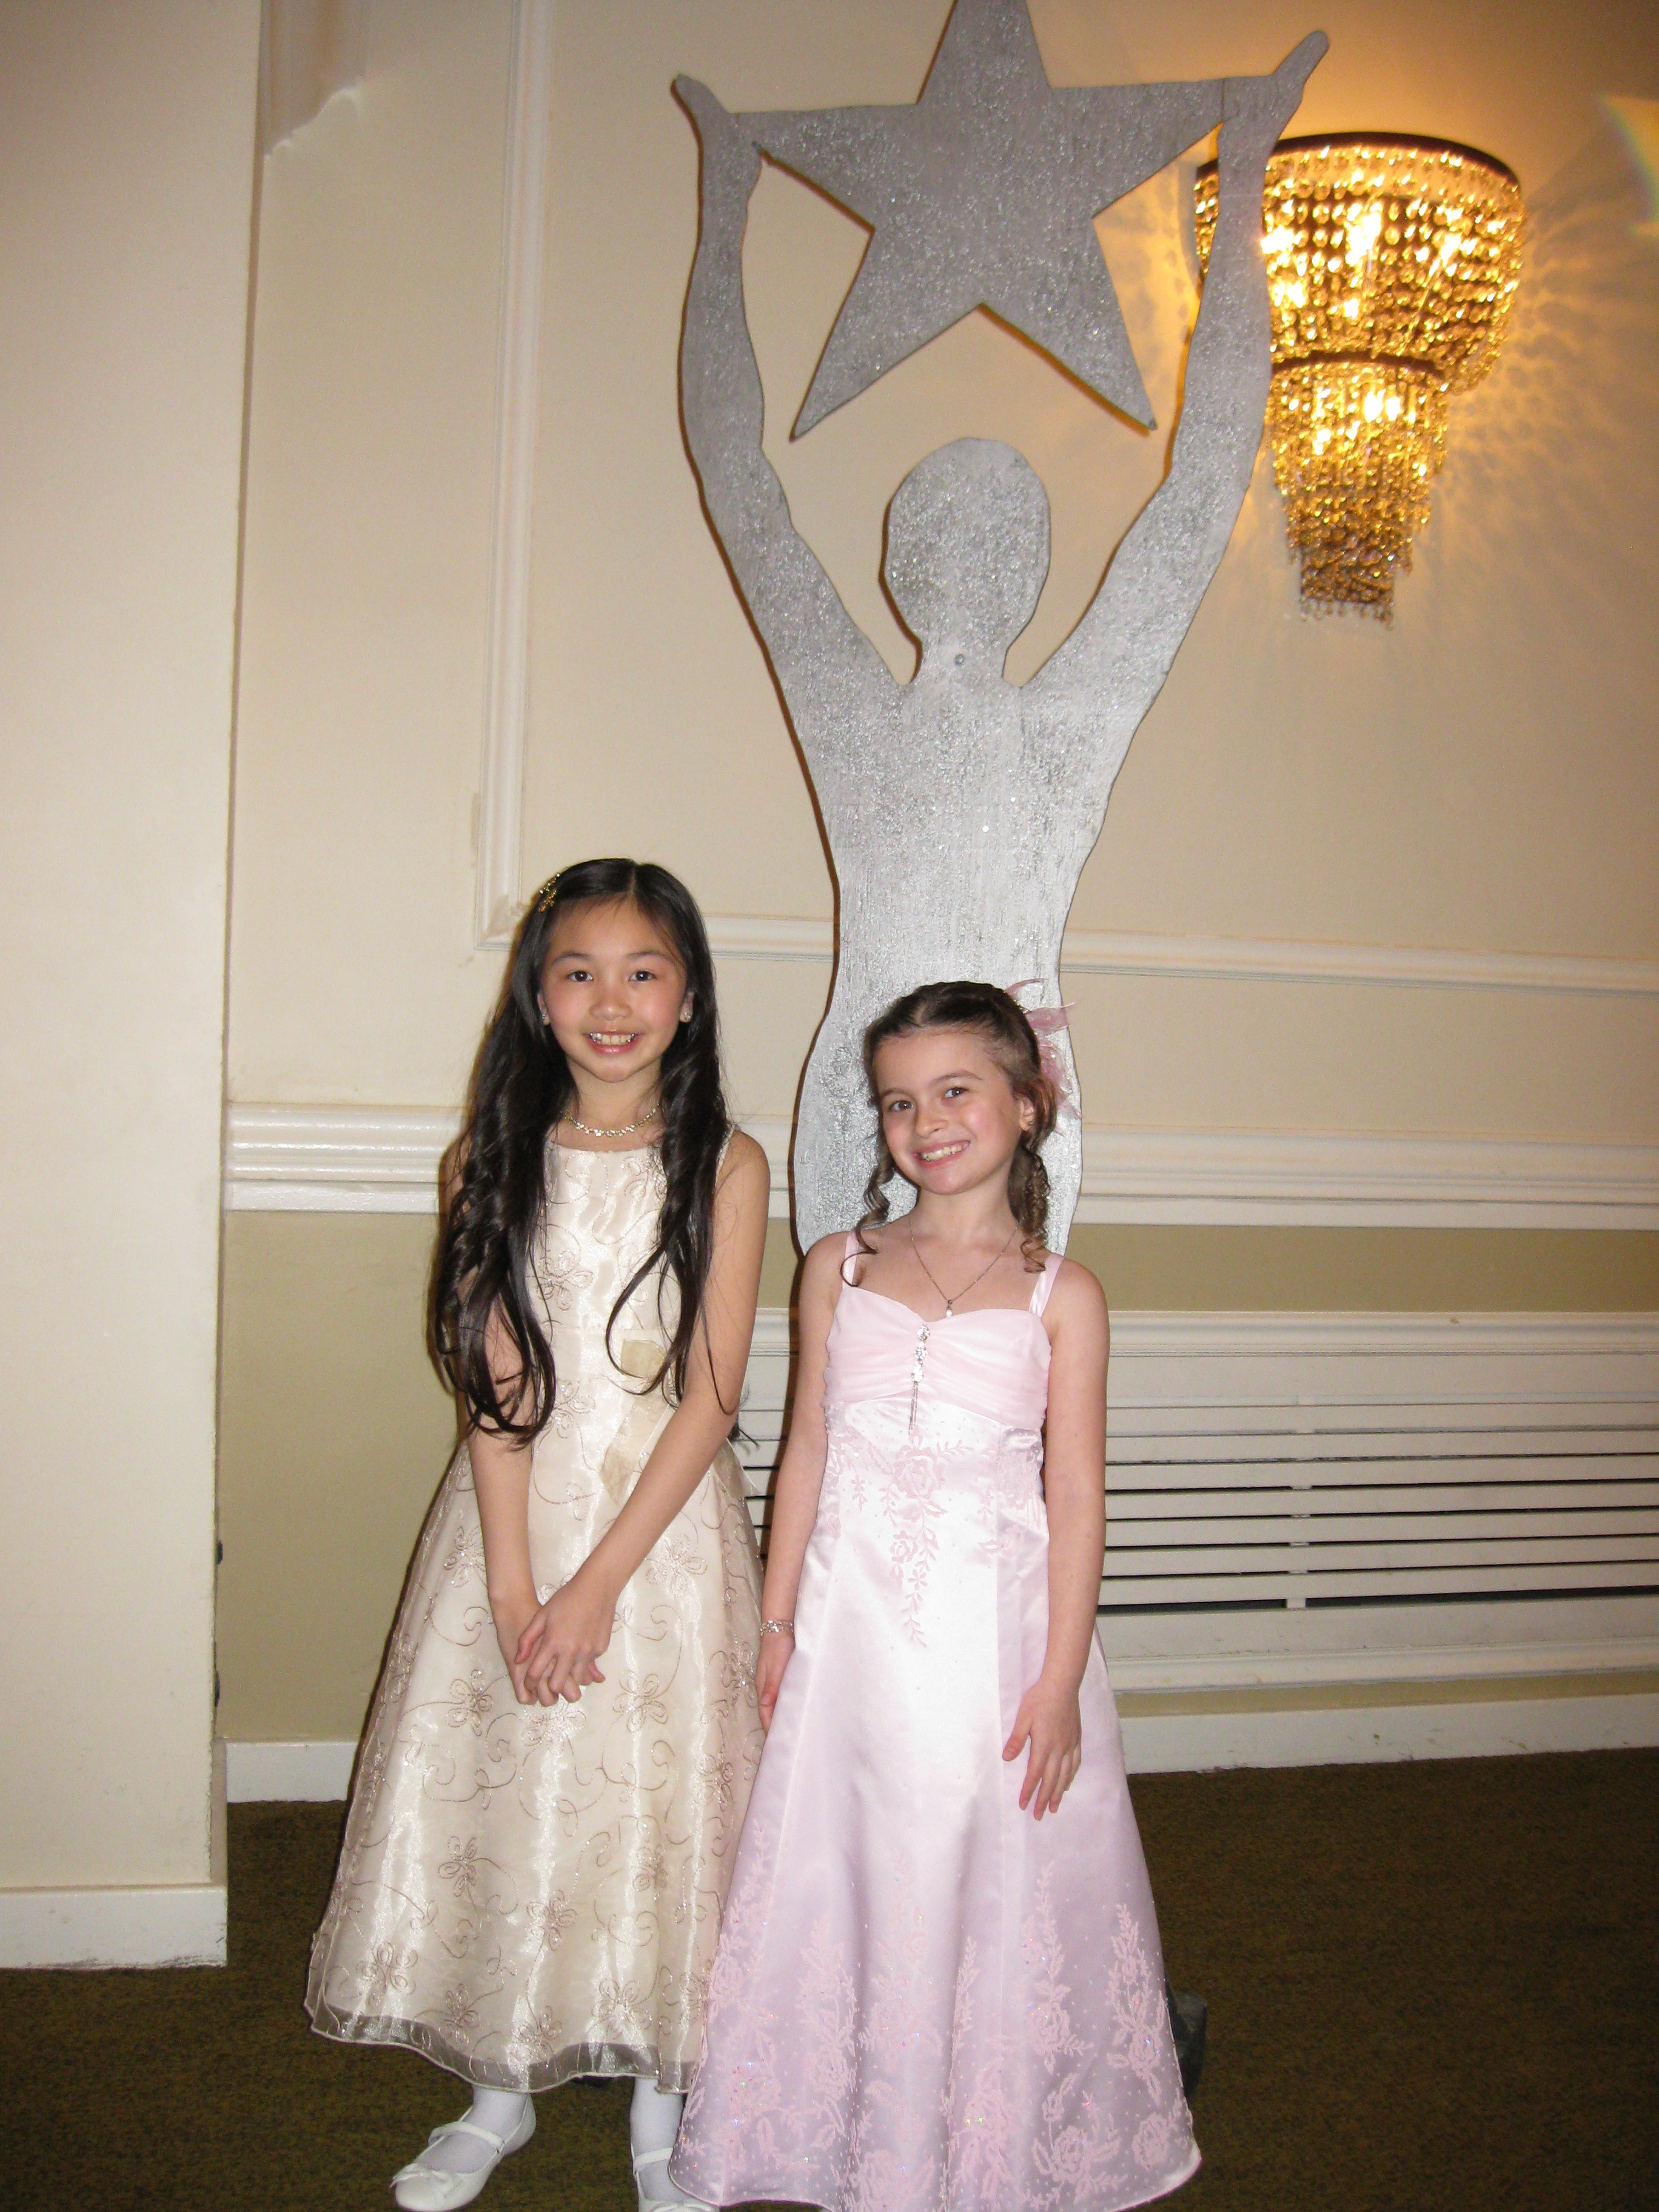 Dalila Bela & Melody Choy at the 32nd Young Arstists Award (2011)in L.A.